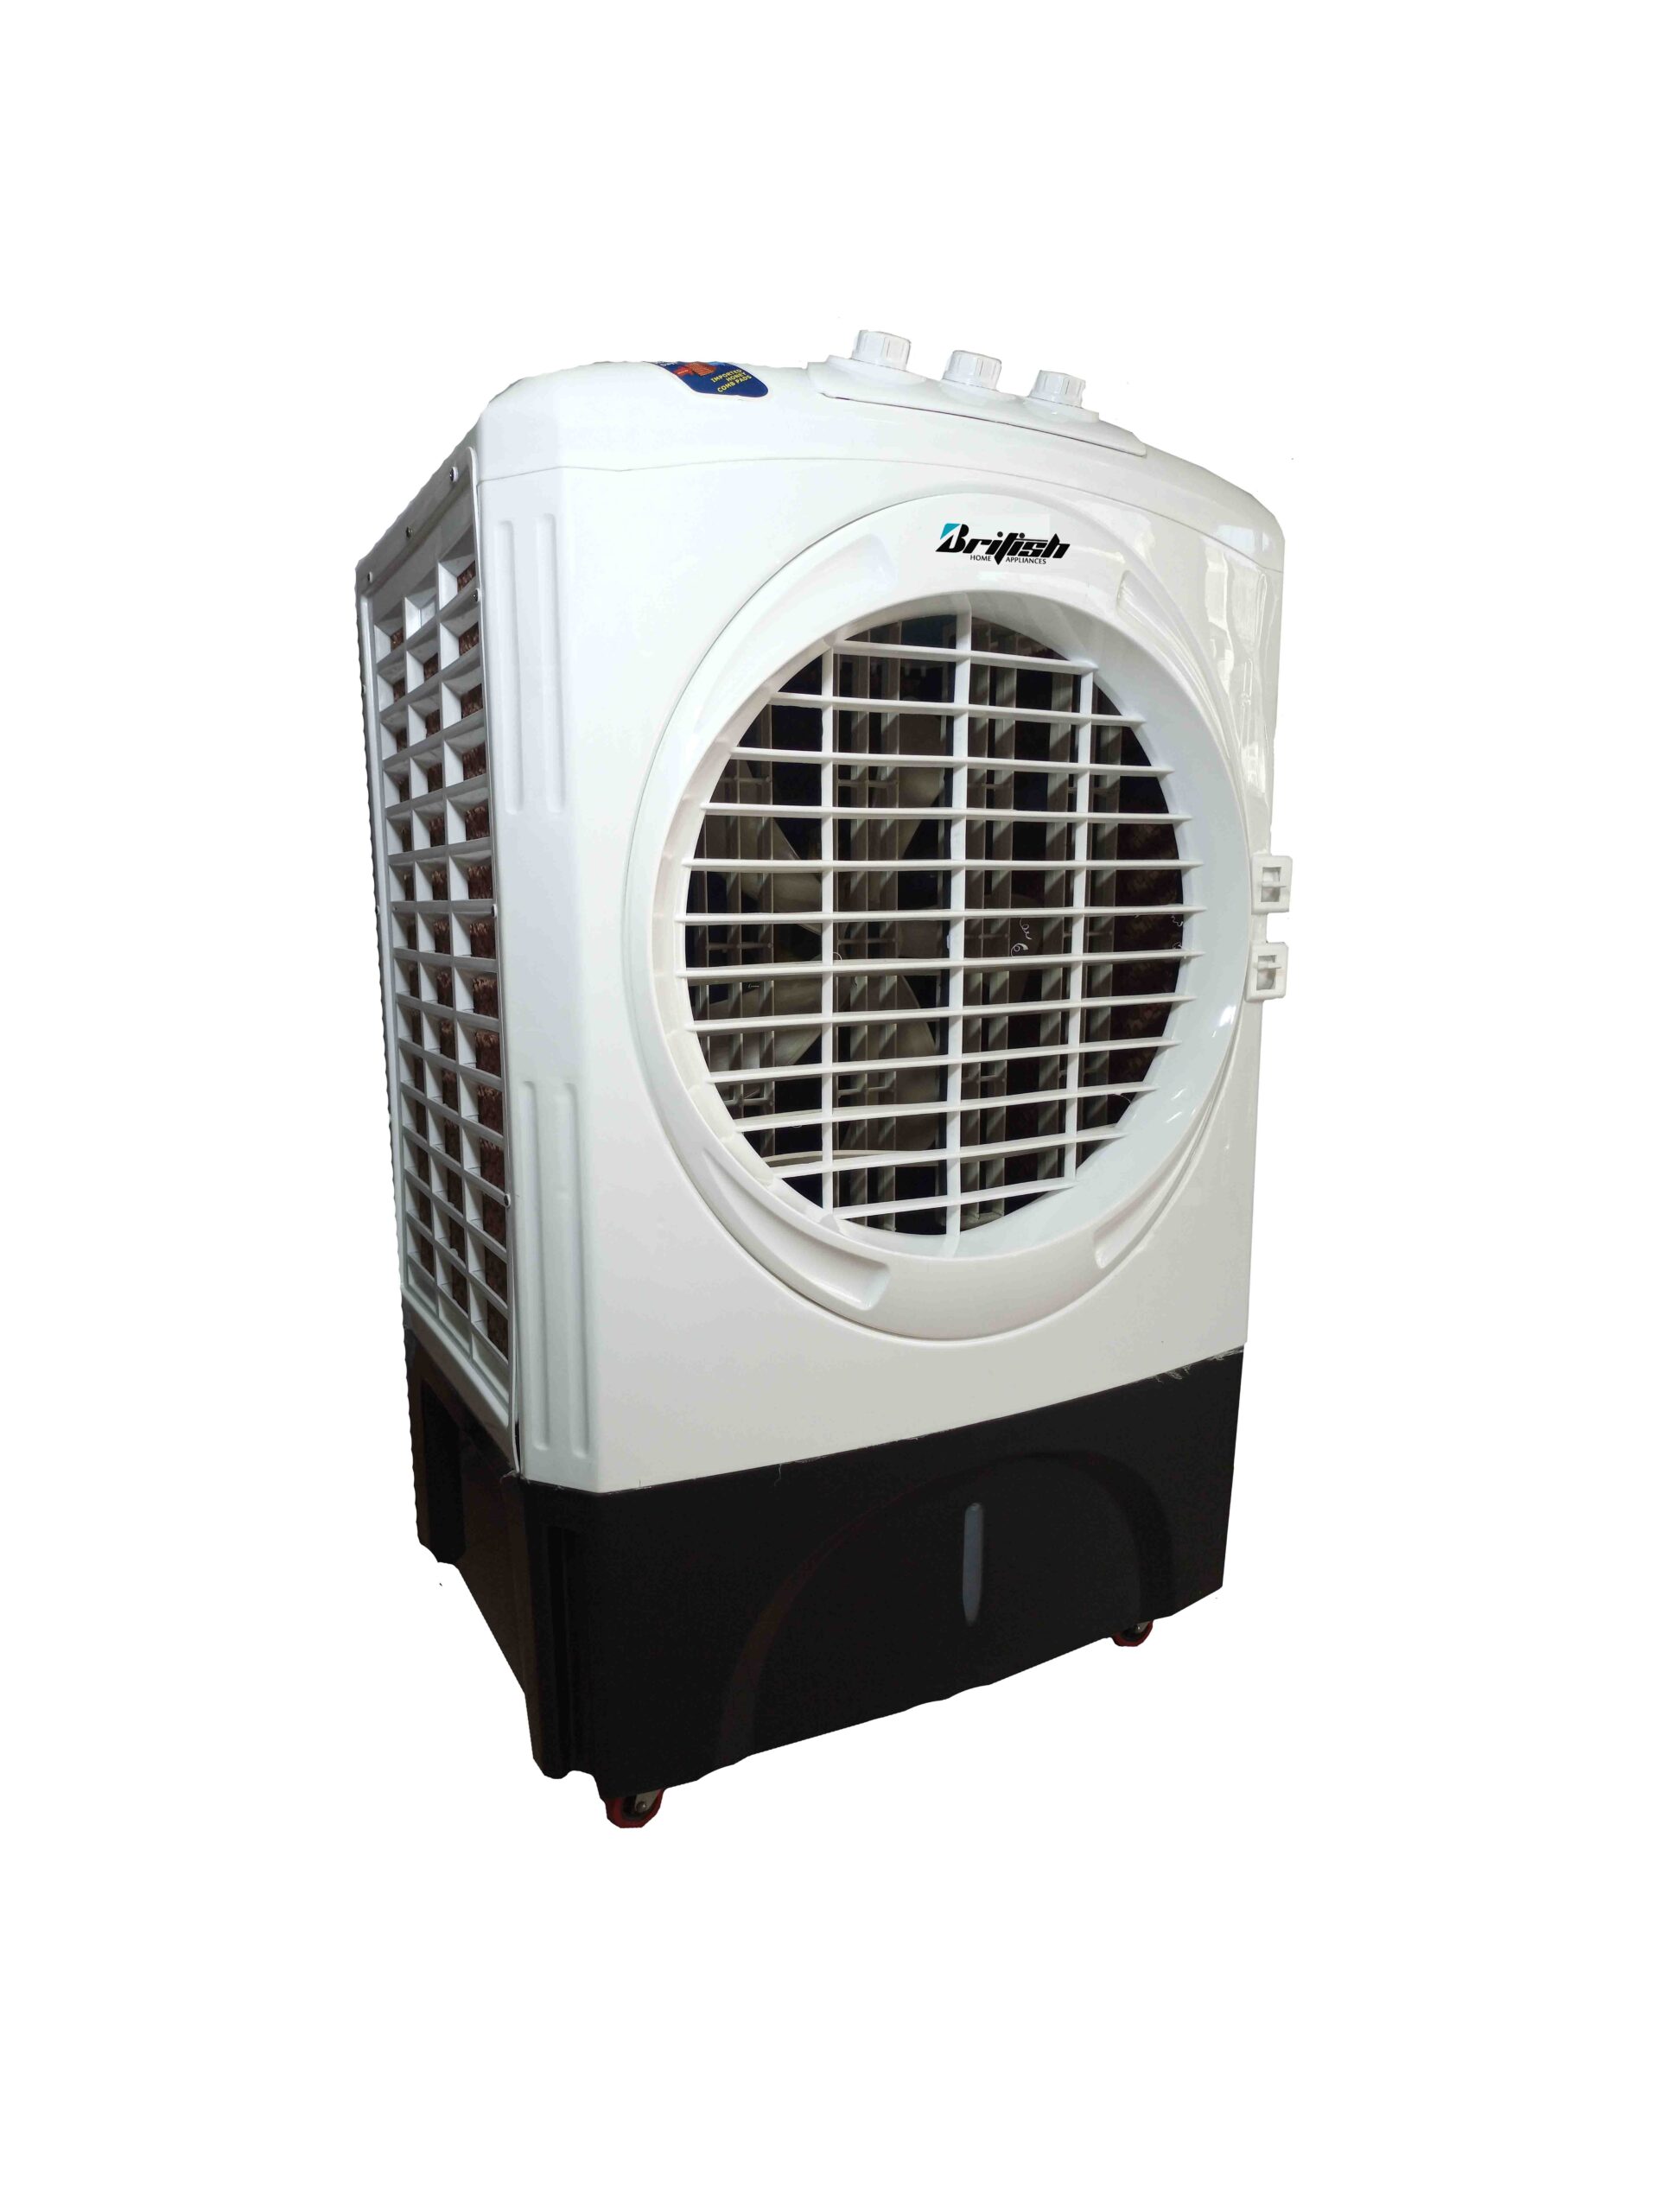 room air cooler model bac-6000 with ice box